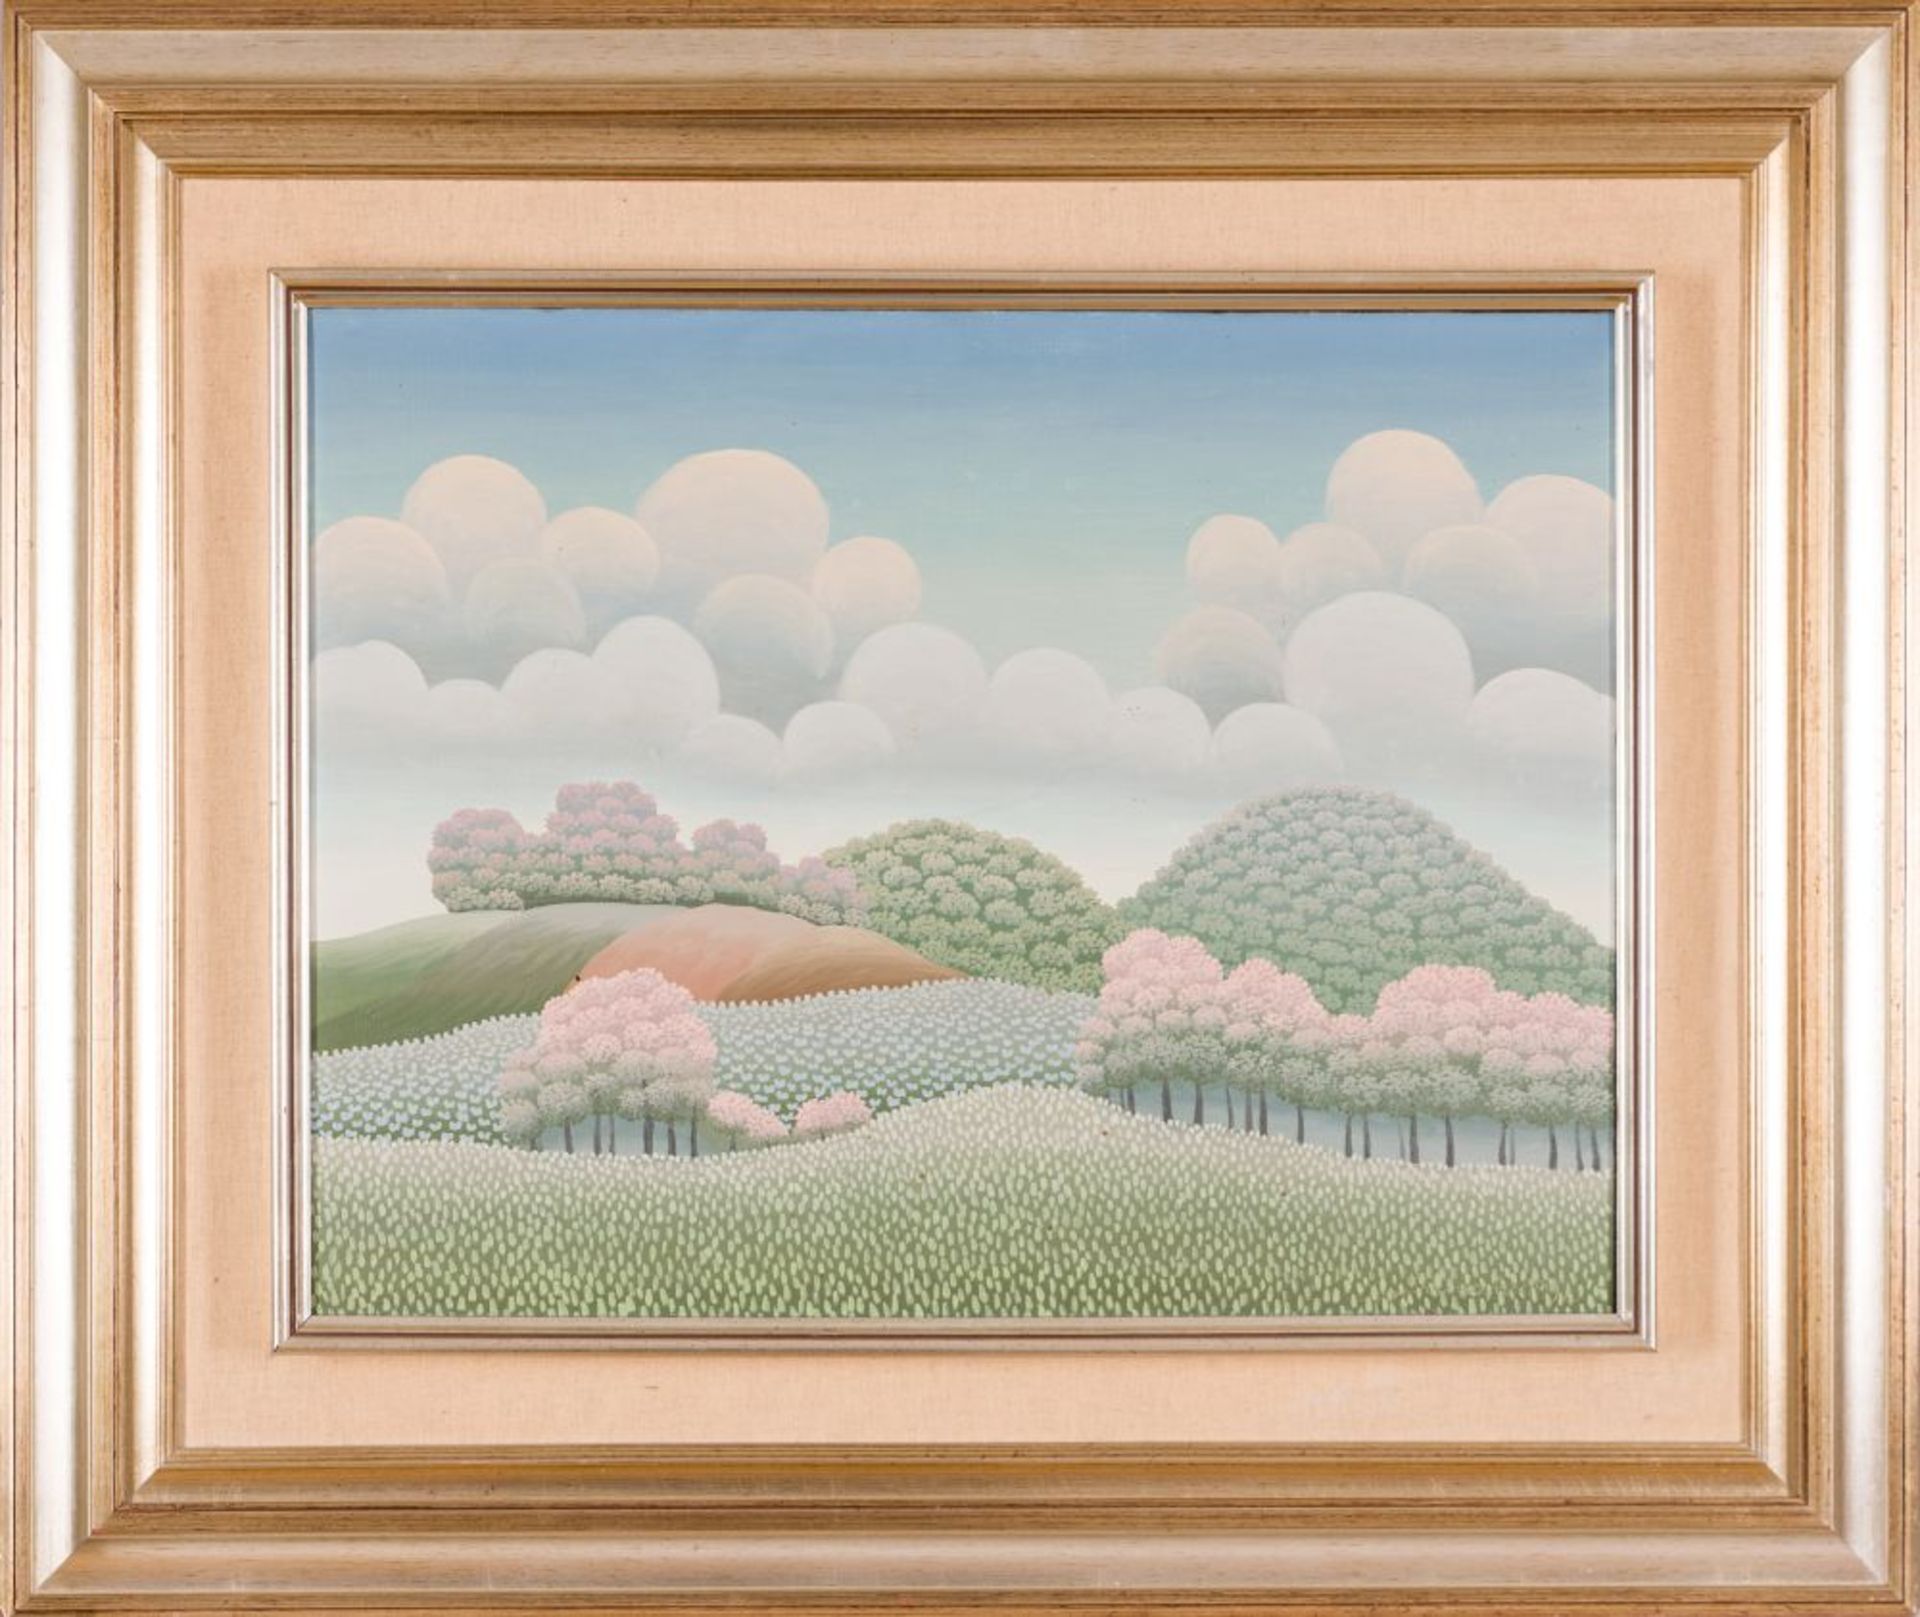 Hilly Landscape, 1992 Oil on canvas Signed and dated lower right 20,1 x 26 in framed - Image 2 of 4